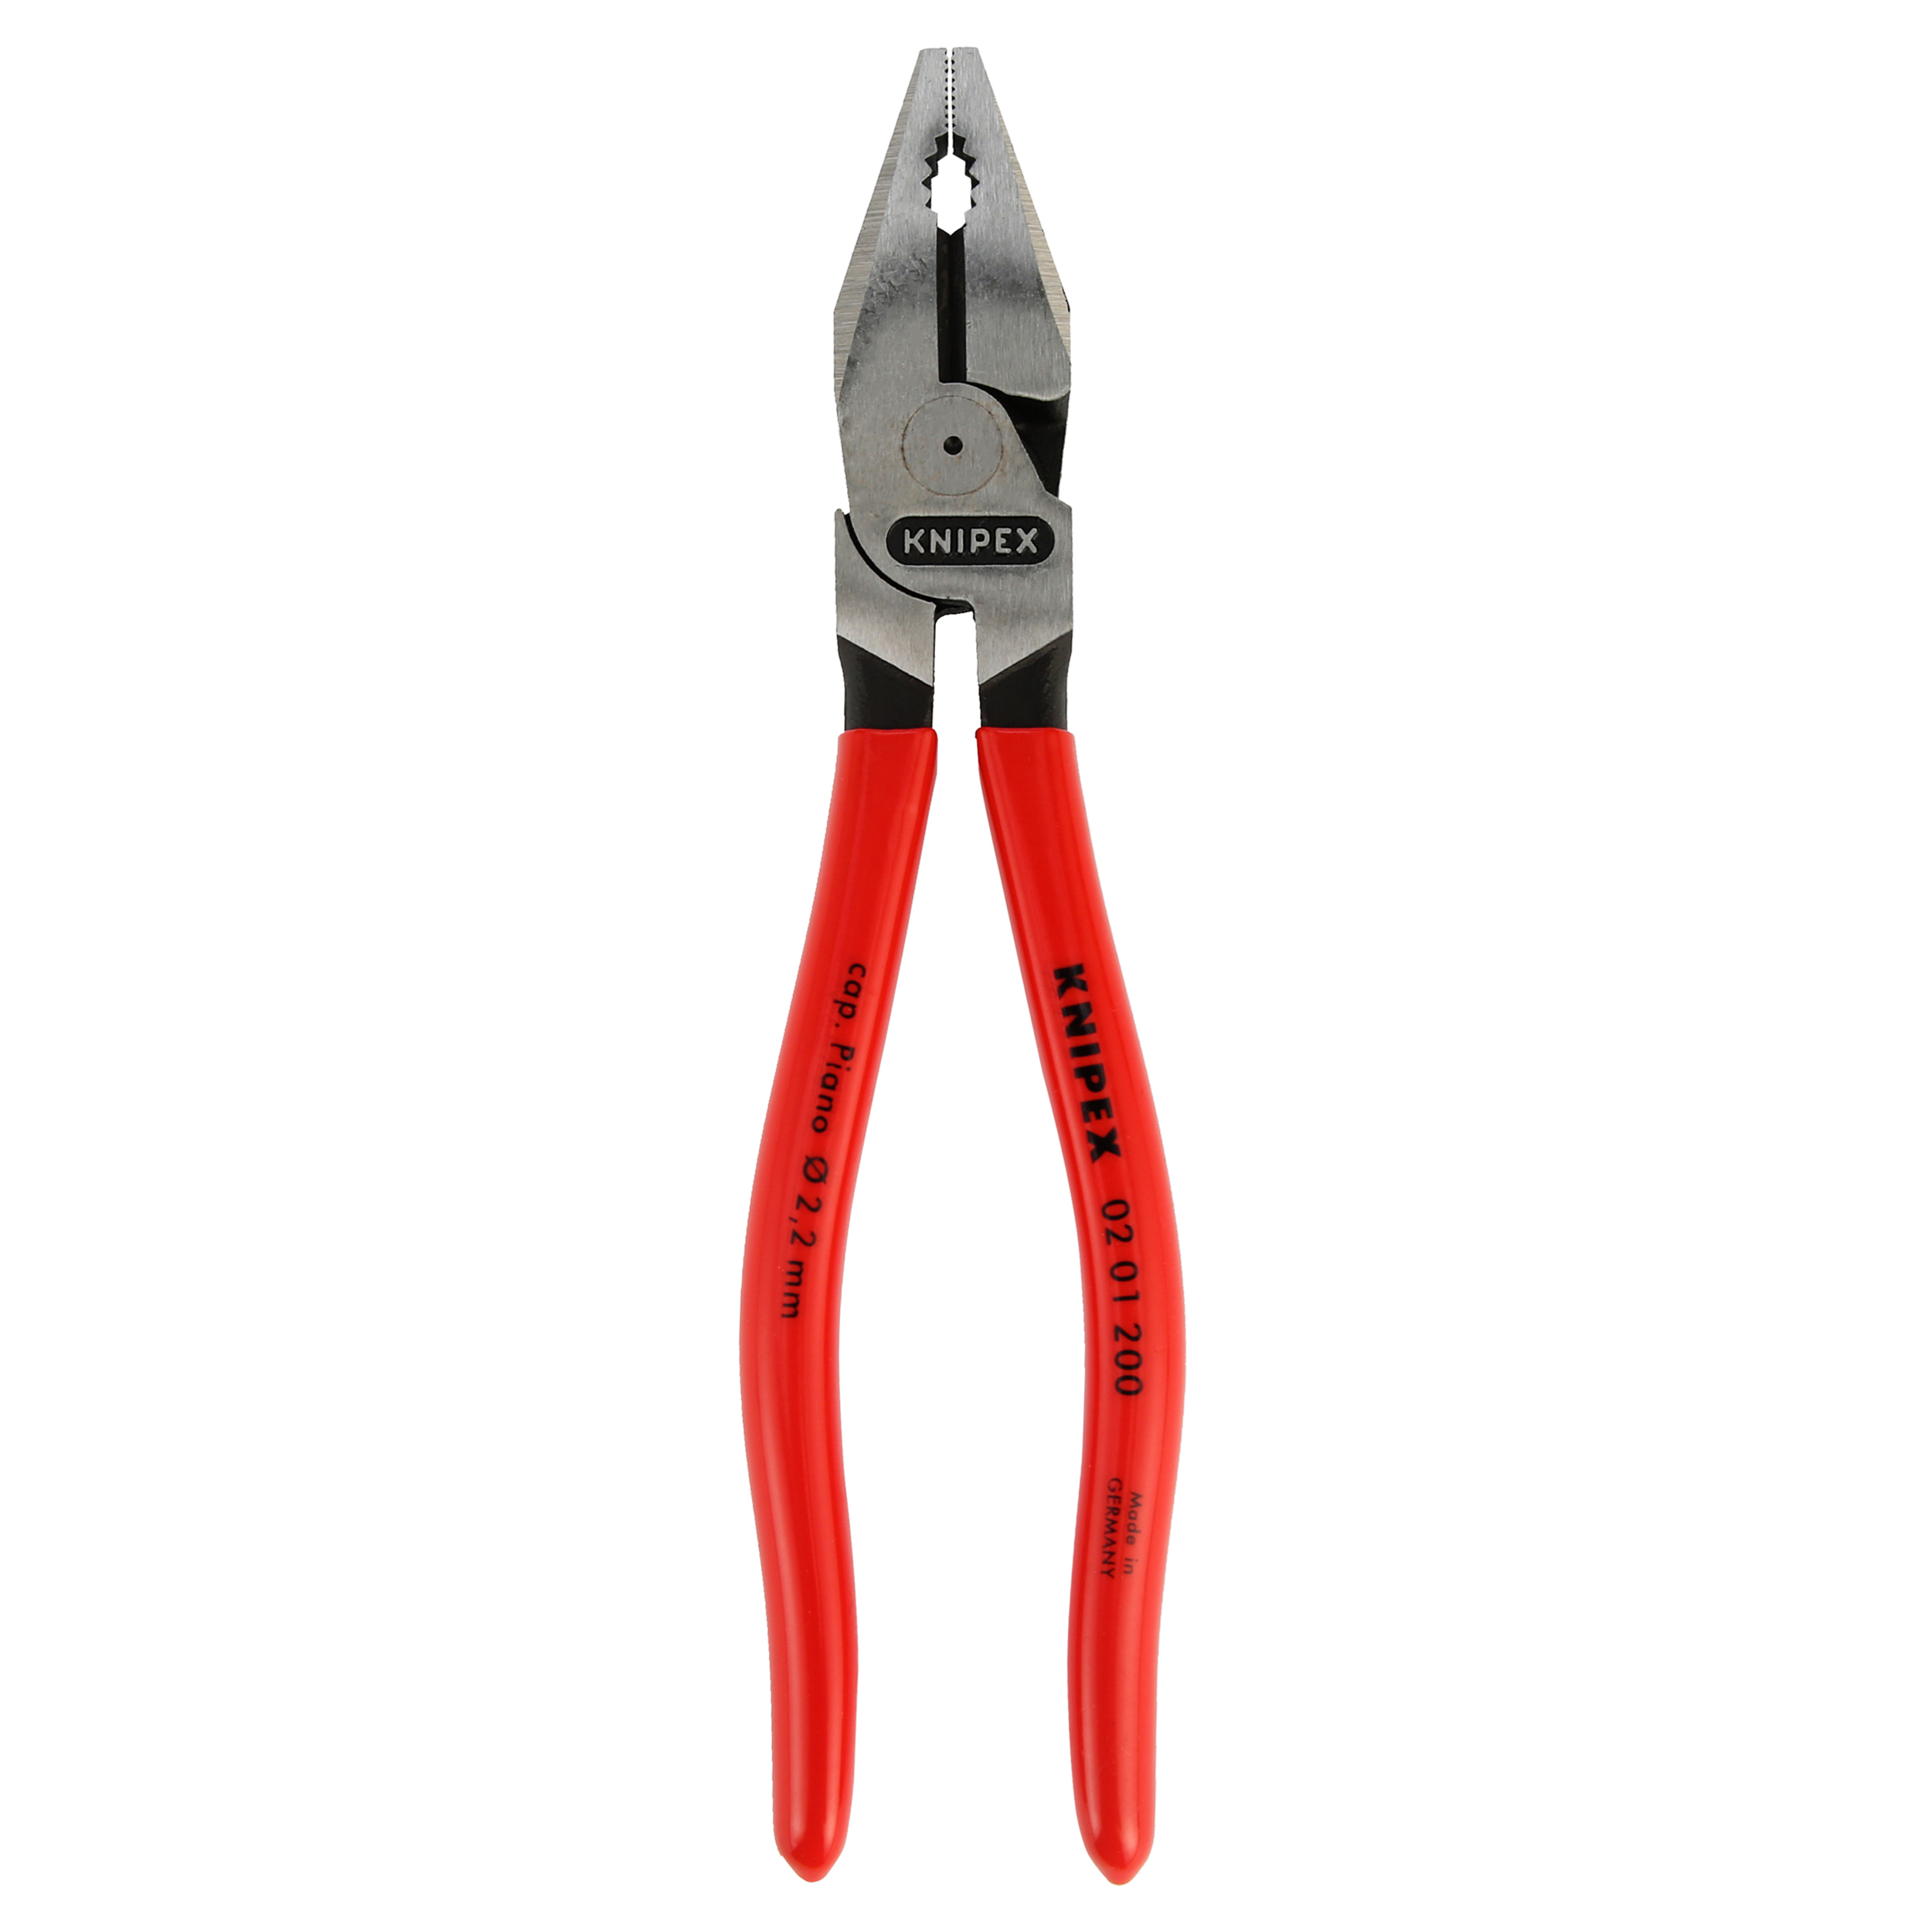 KNIPEX Tools 02 01 200, 8-Inch High Leverage Combination Pliers - image 4 of 8